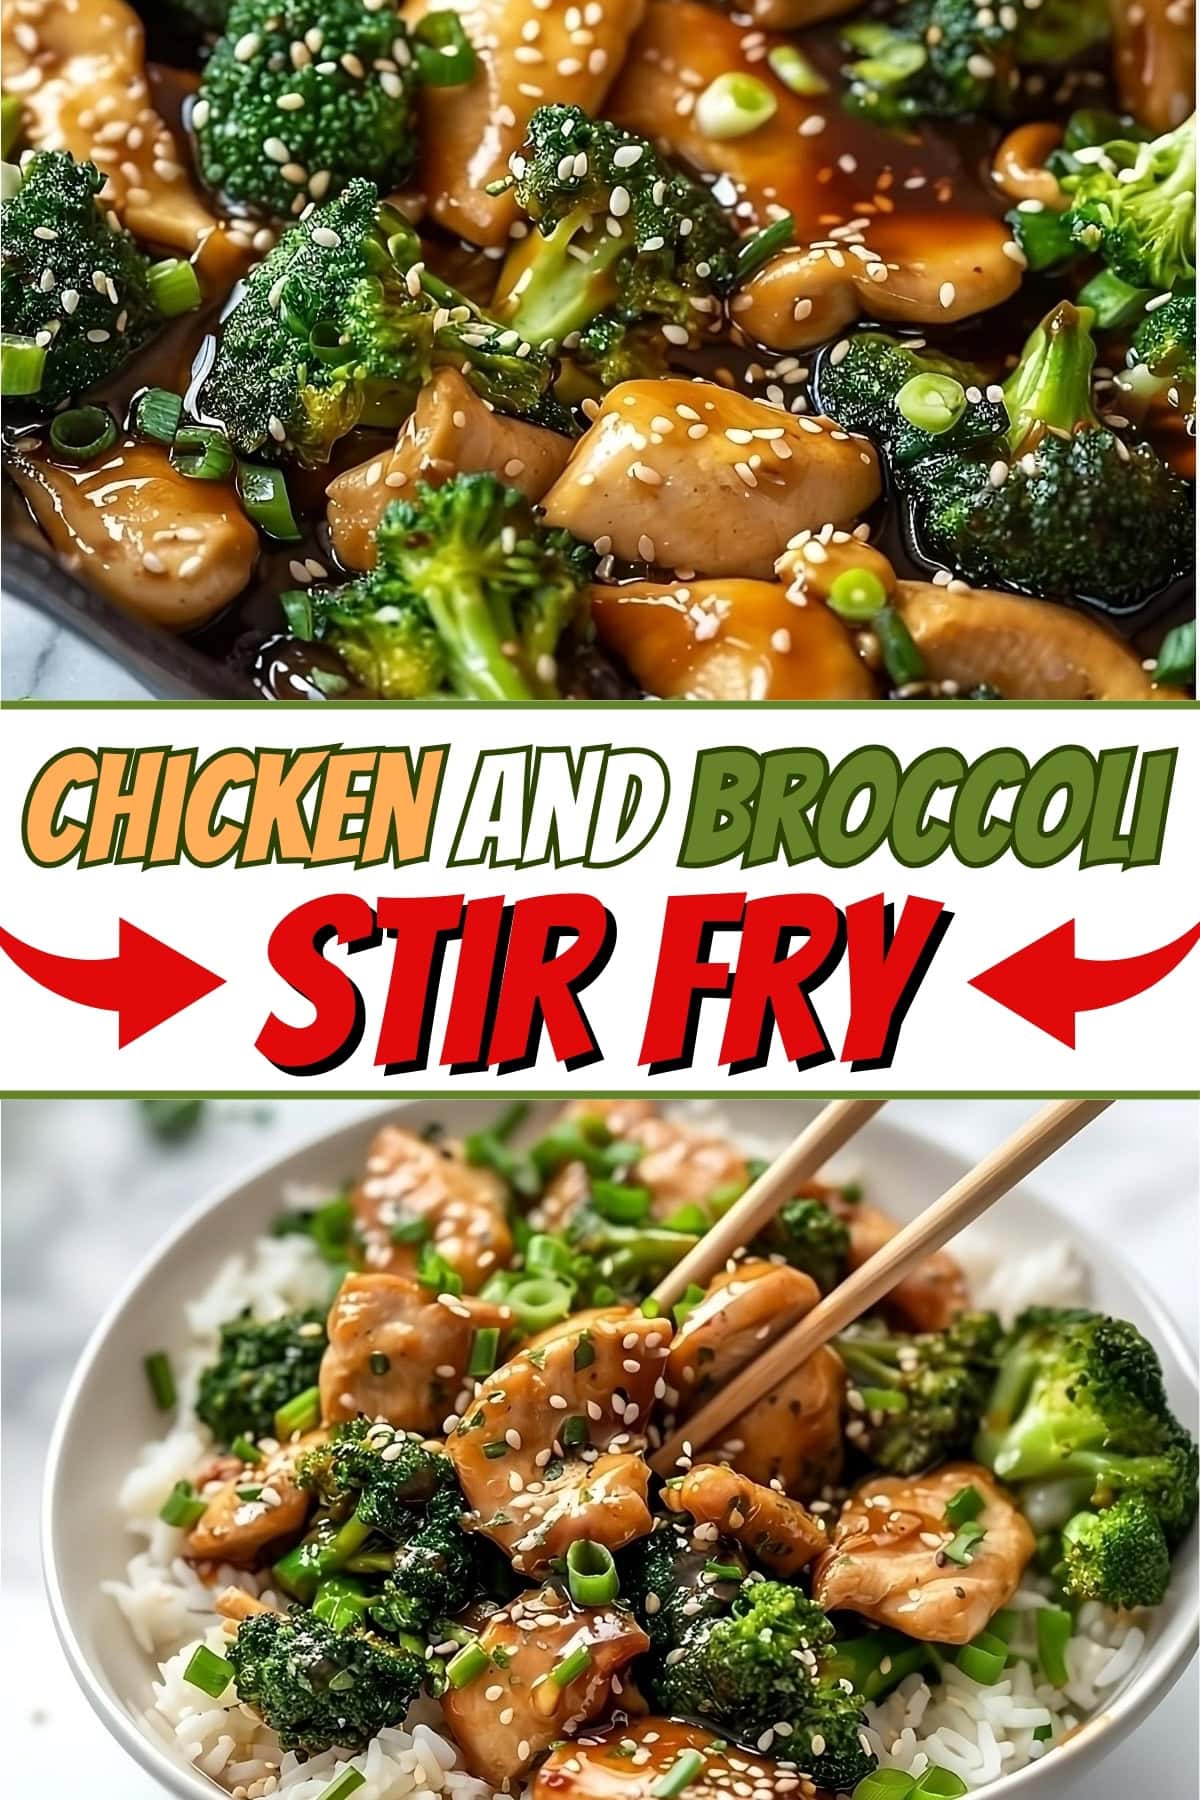 Chicken and Broccoli Stir-Fry - Insanely Good